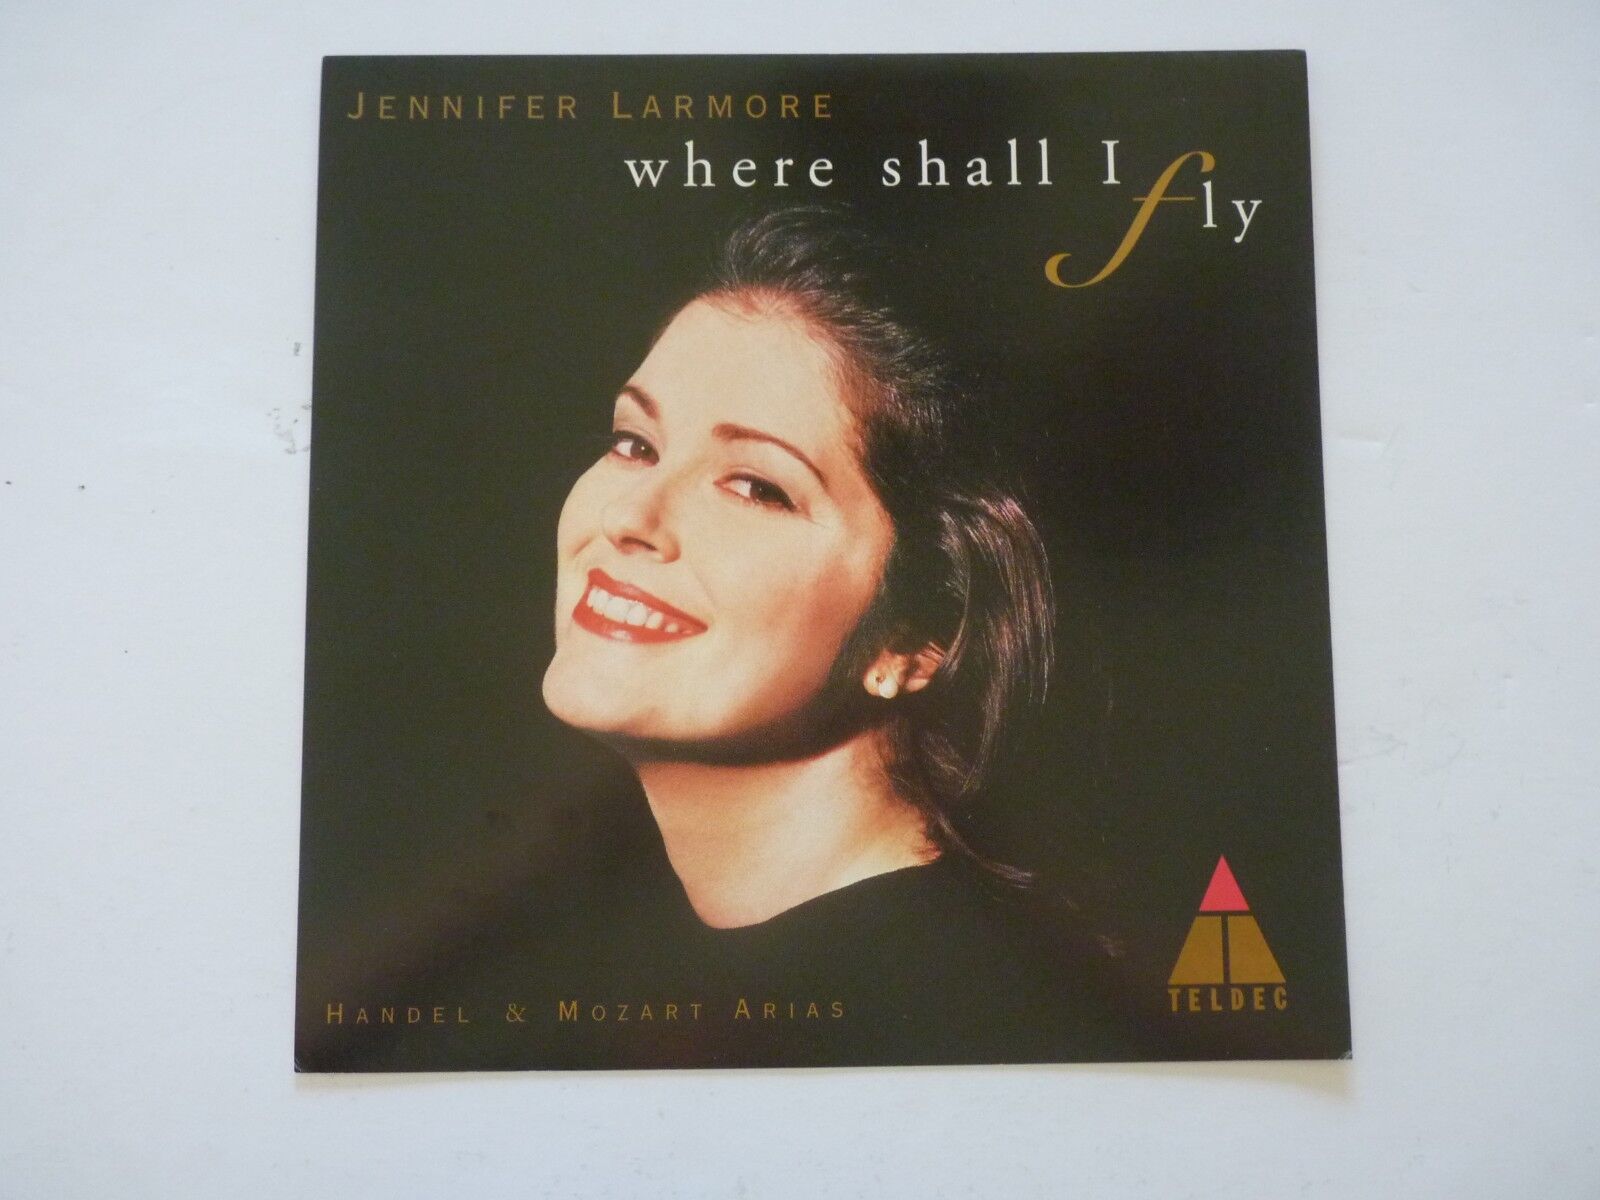 Jennifer Larmore Where Shall I Fly LP Record Photo Poster painting Flat 12x12 Poster